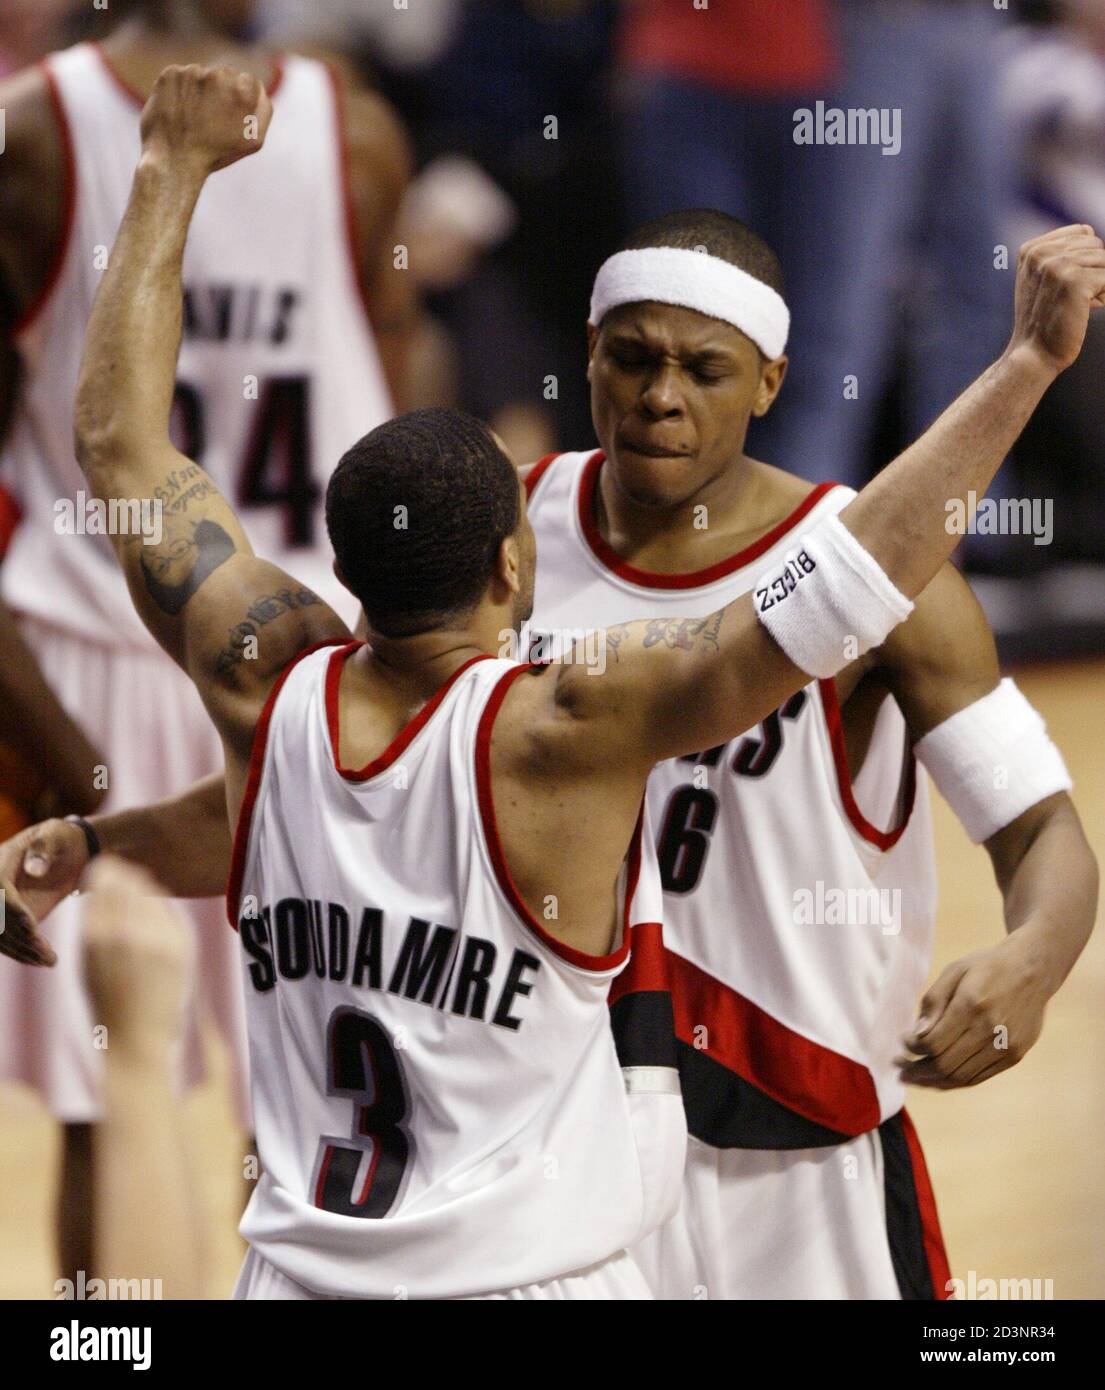 Portland Trail Blazers Damon Stoudamire (3) and Bonzi Wells (R) celebrate a  basket during the third quarter of their NBA playoff game against the  Dallas Mavericks in Portland on April 27, 2003.